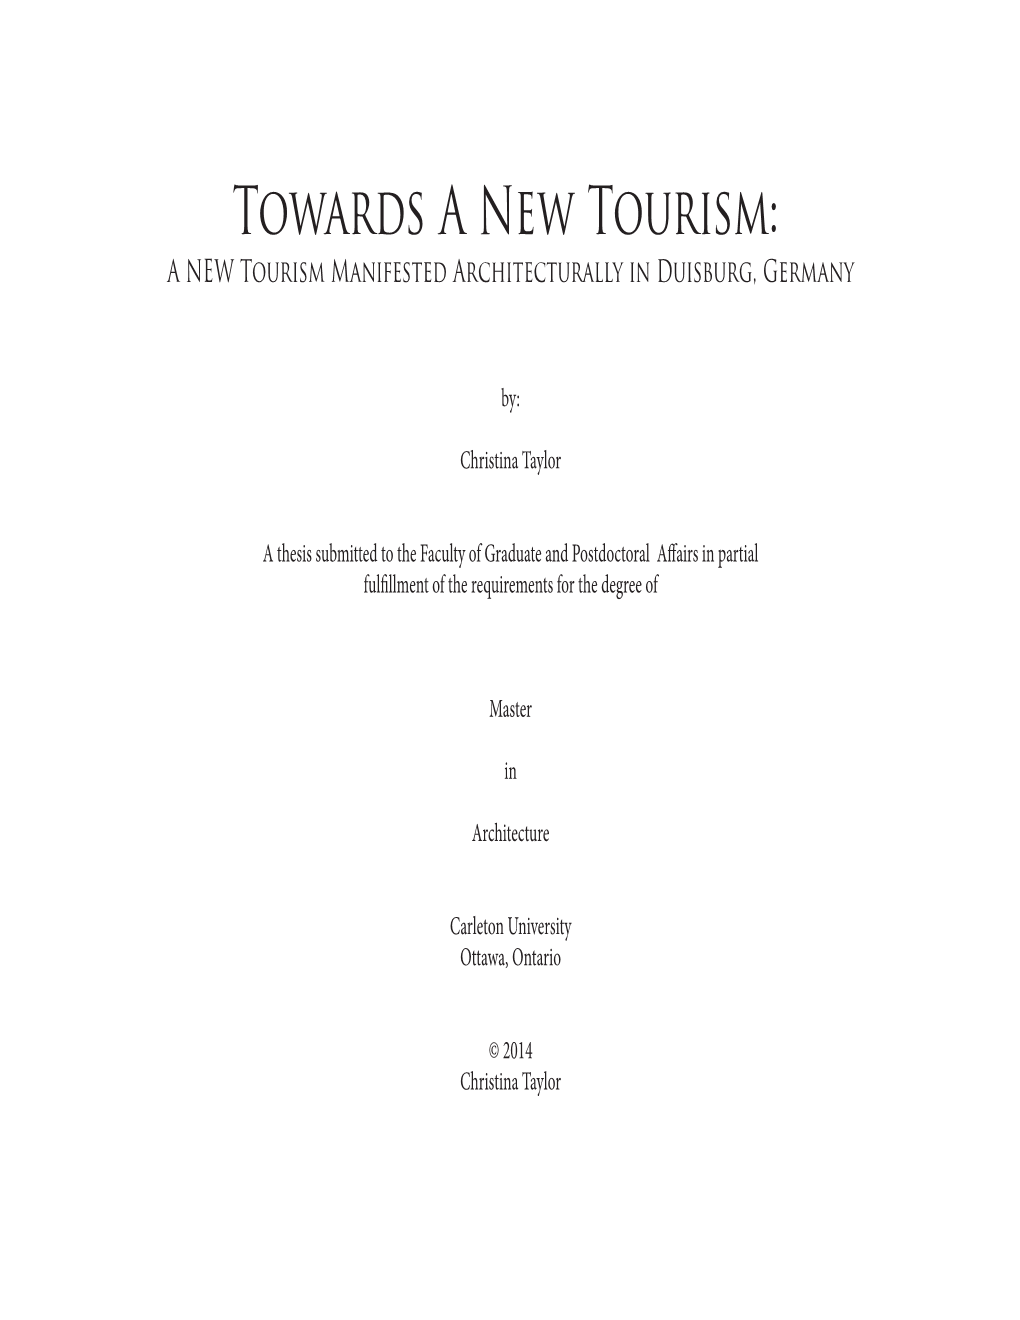 Towards a New Tourism: a NEW Tourism Manifested Architecturally in Duisburg, Germany